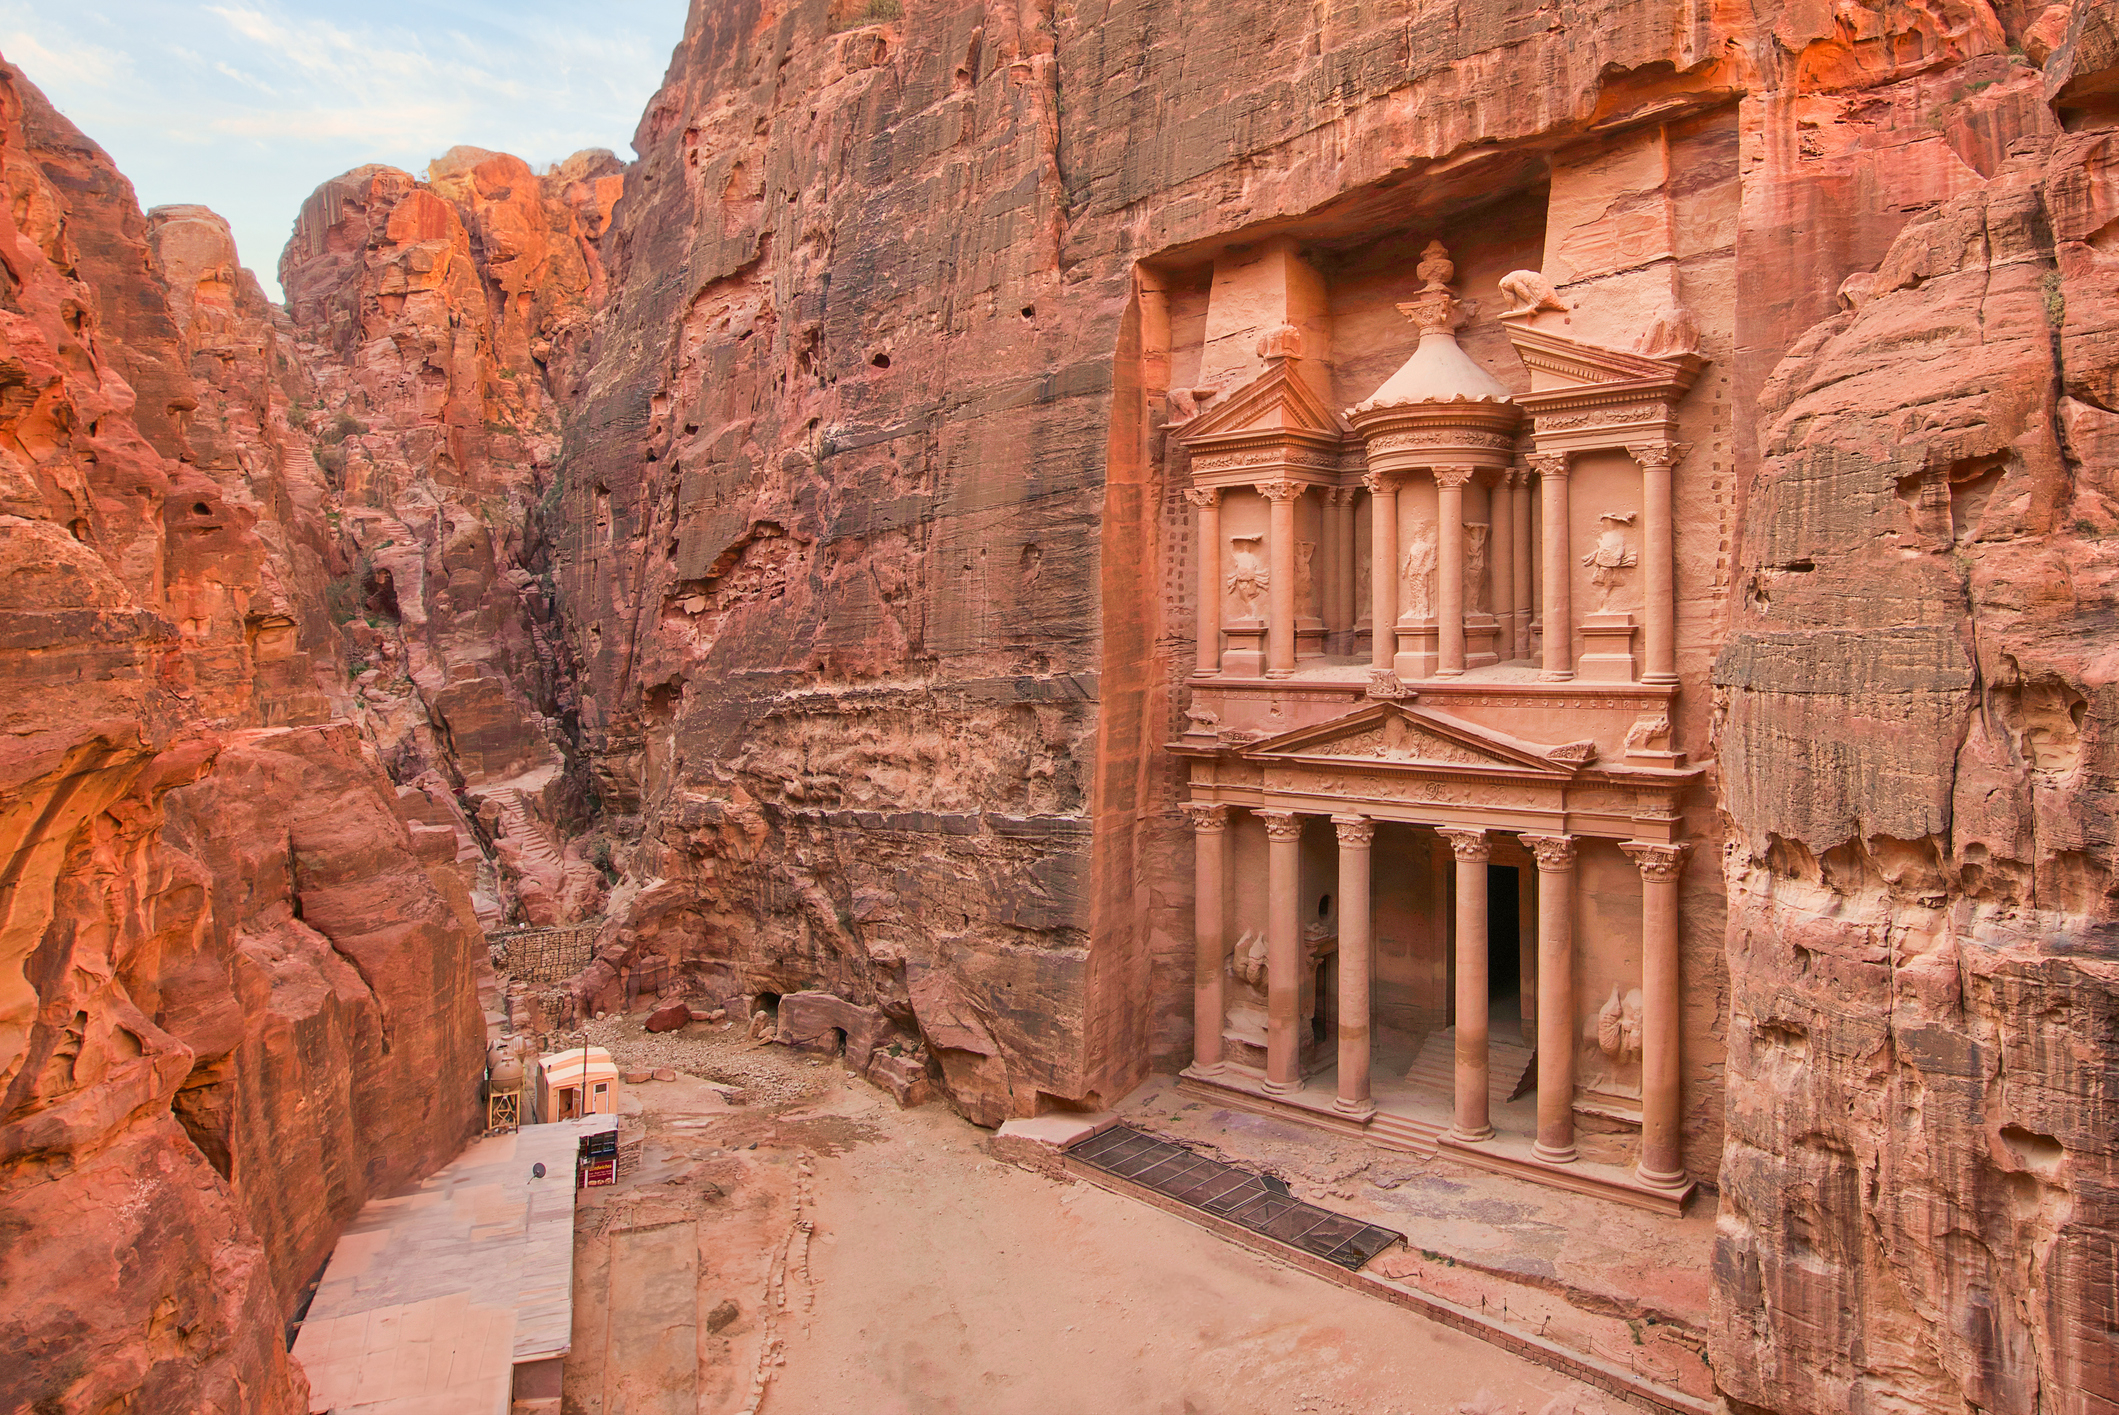 The ancient carved facade of Al-Khazneh in Petra, with rock cliffs surrounding the structure. No people visible